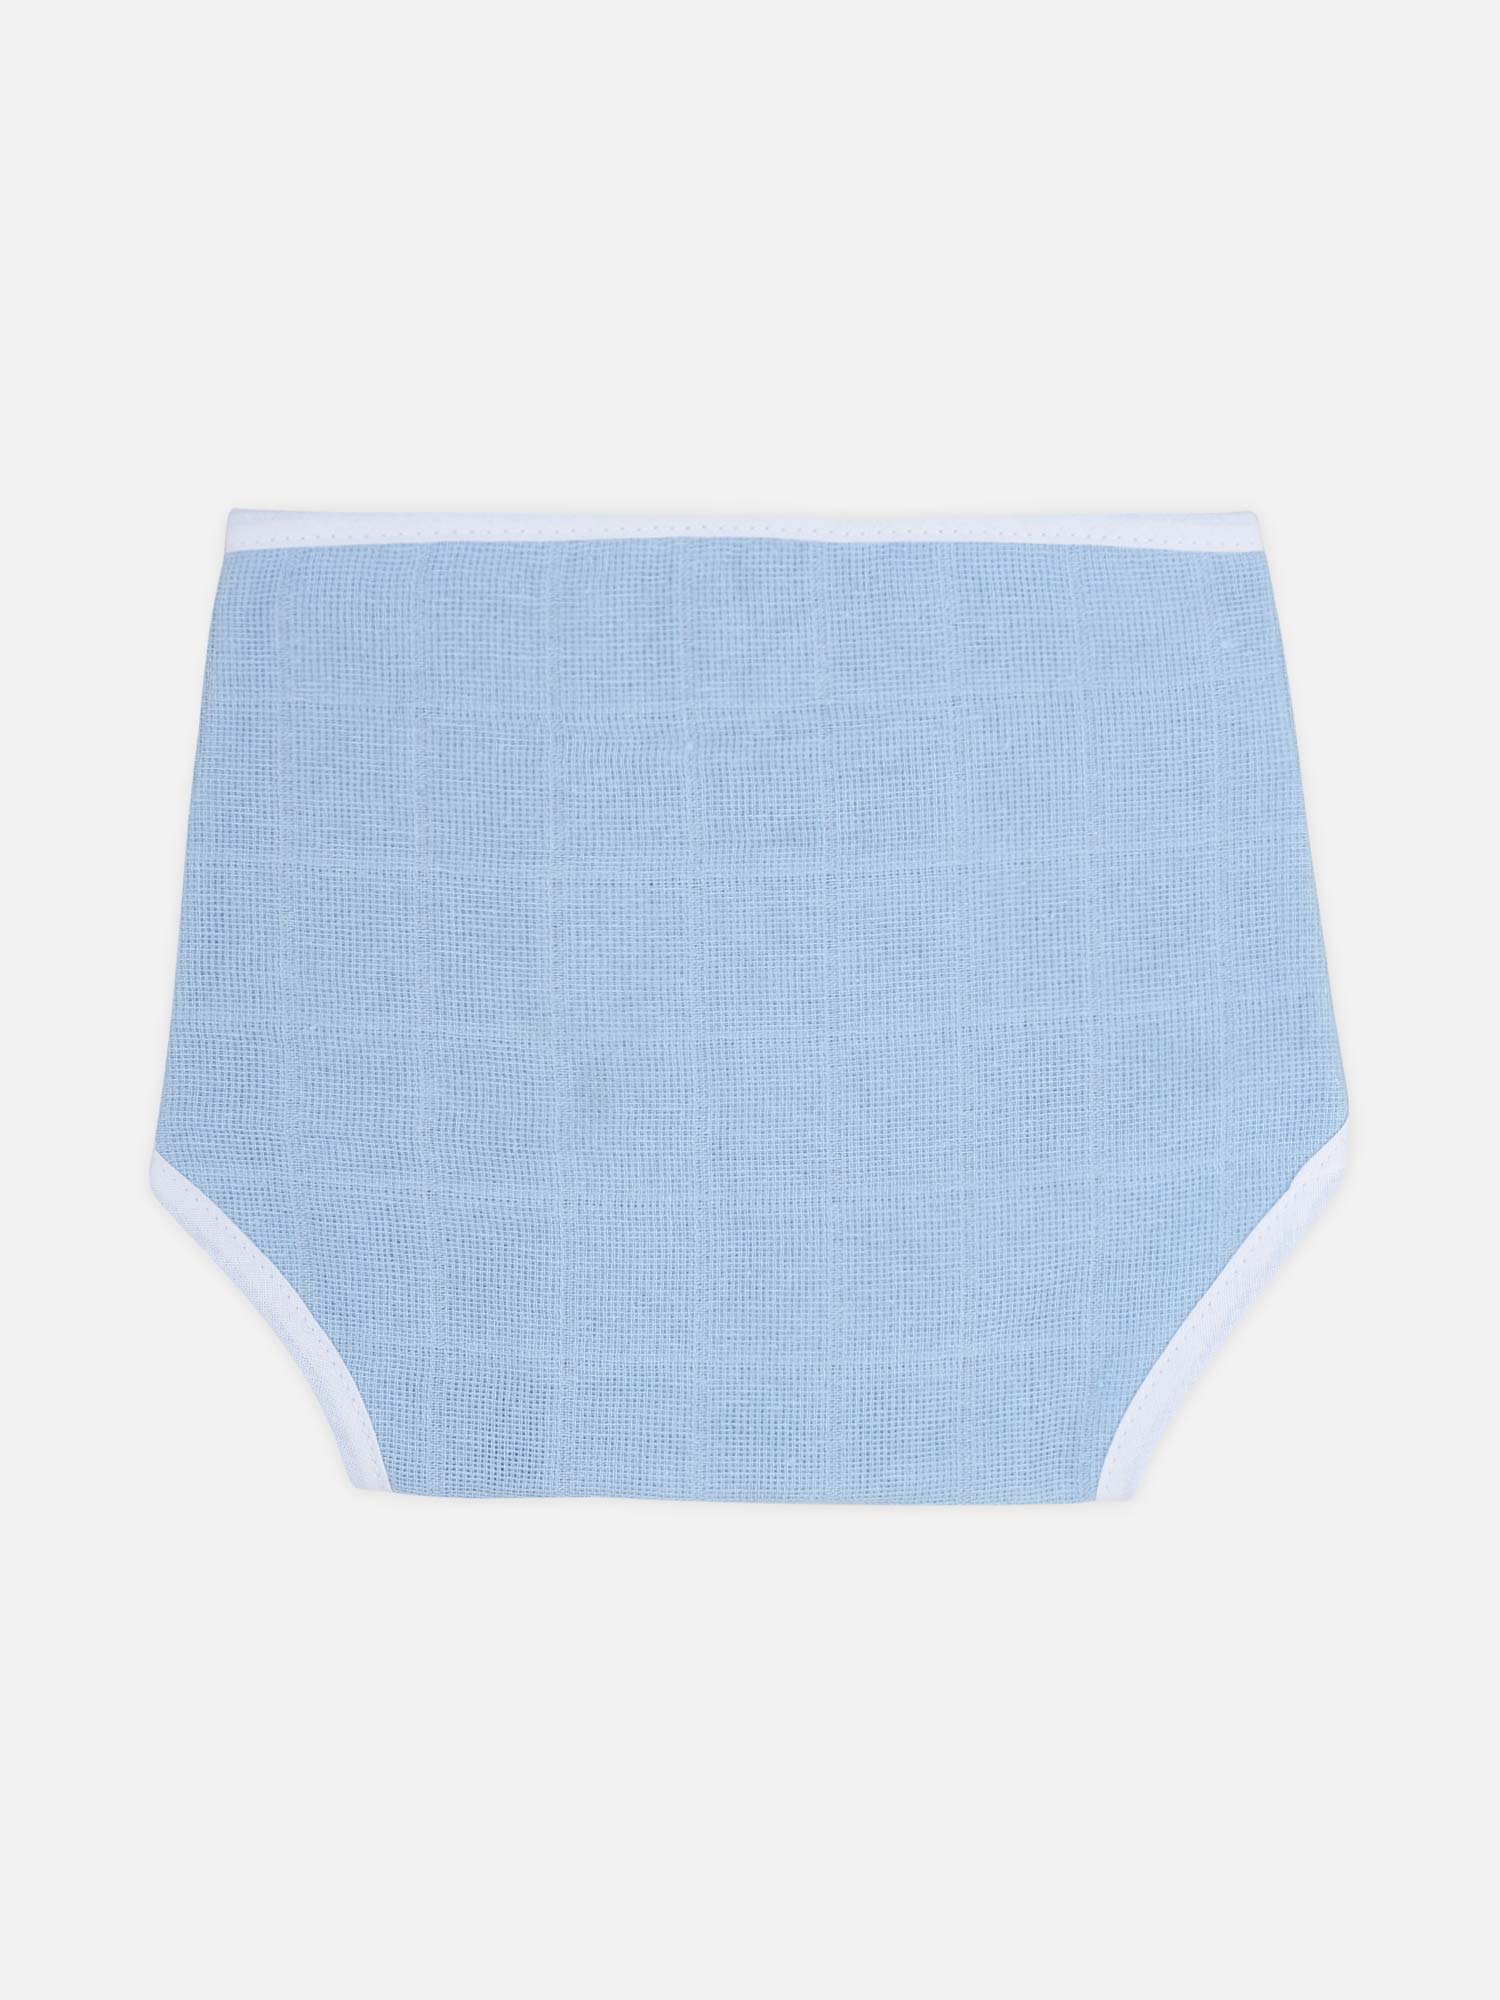 Oh Baby Plain Round Nappies Blue - Rdpl